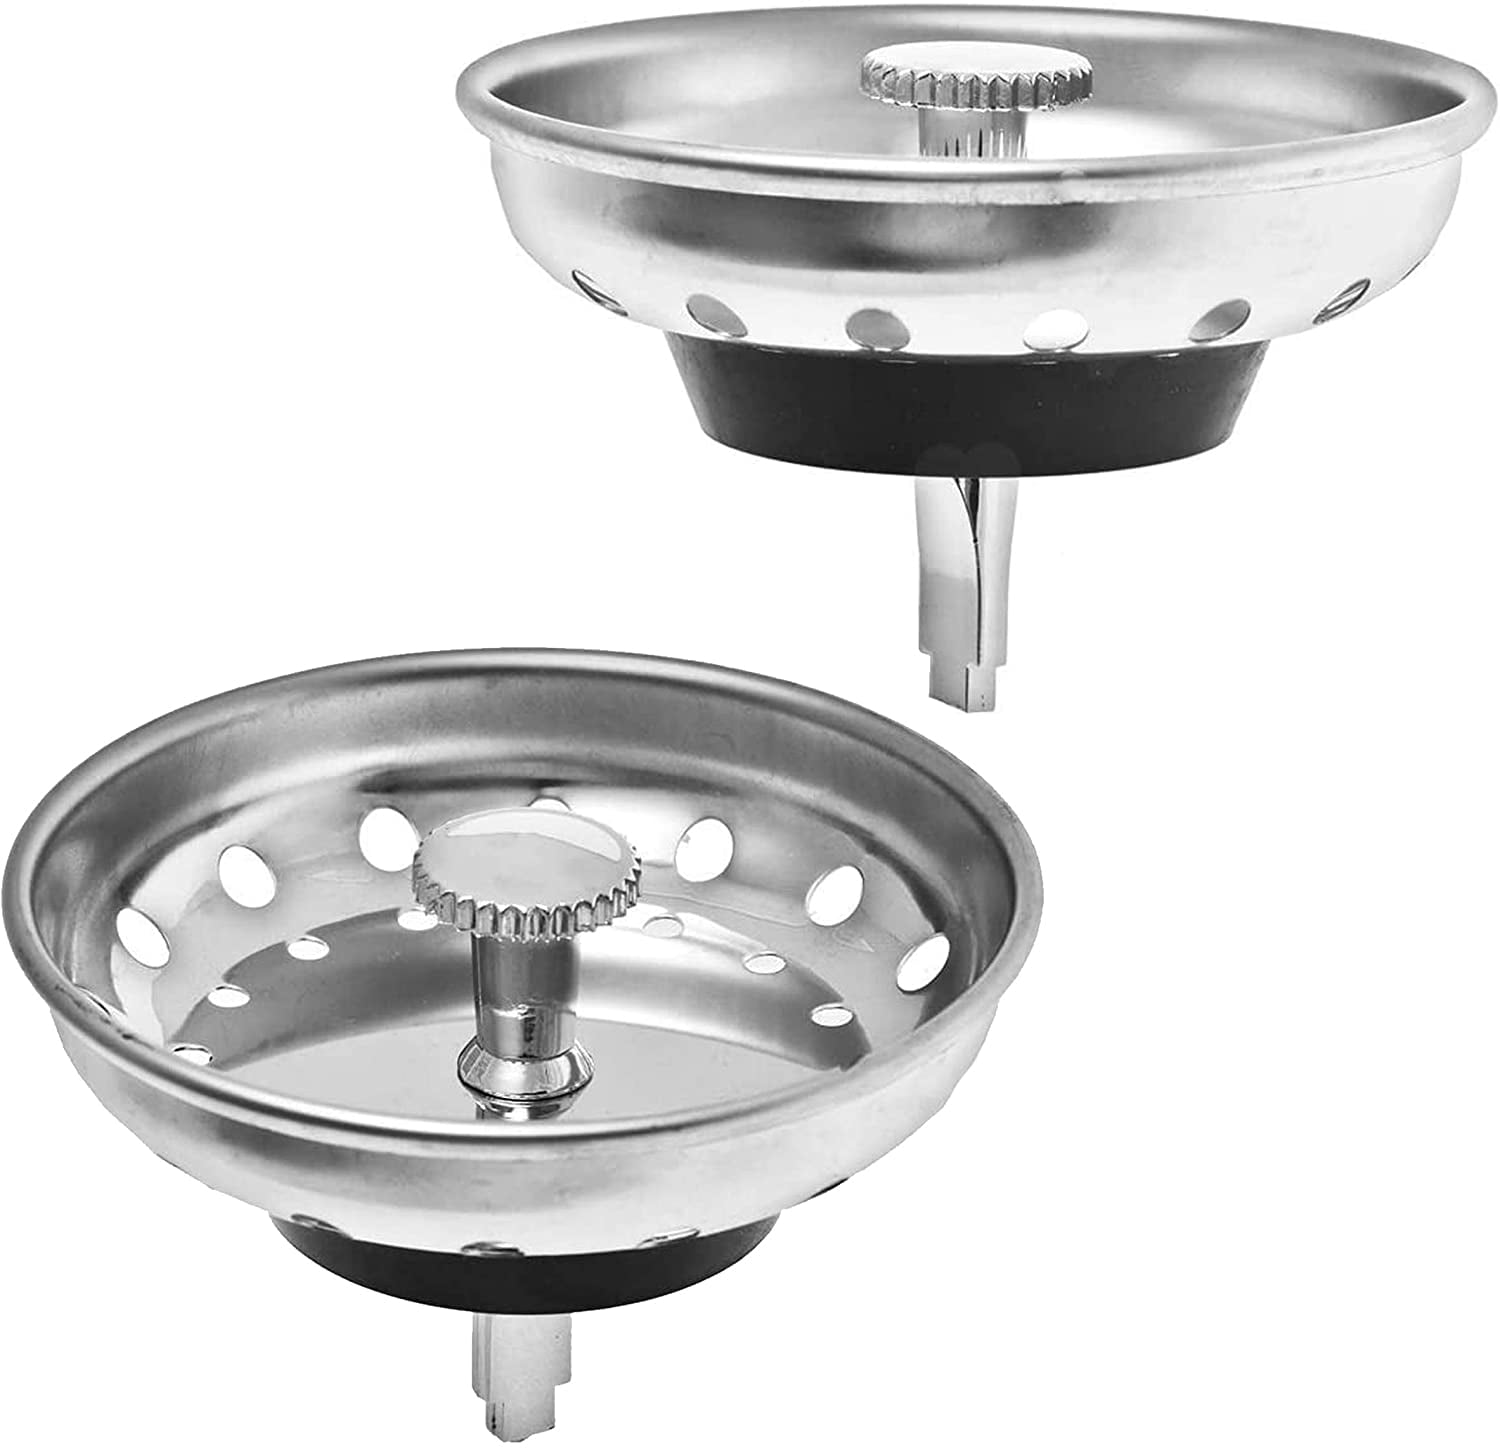 Stainless Steel Kitchen Sink Strainer Basket-Replacement for Standard 3-1/2 Inch 